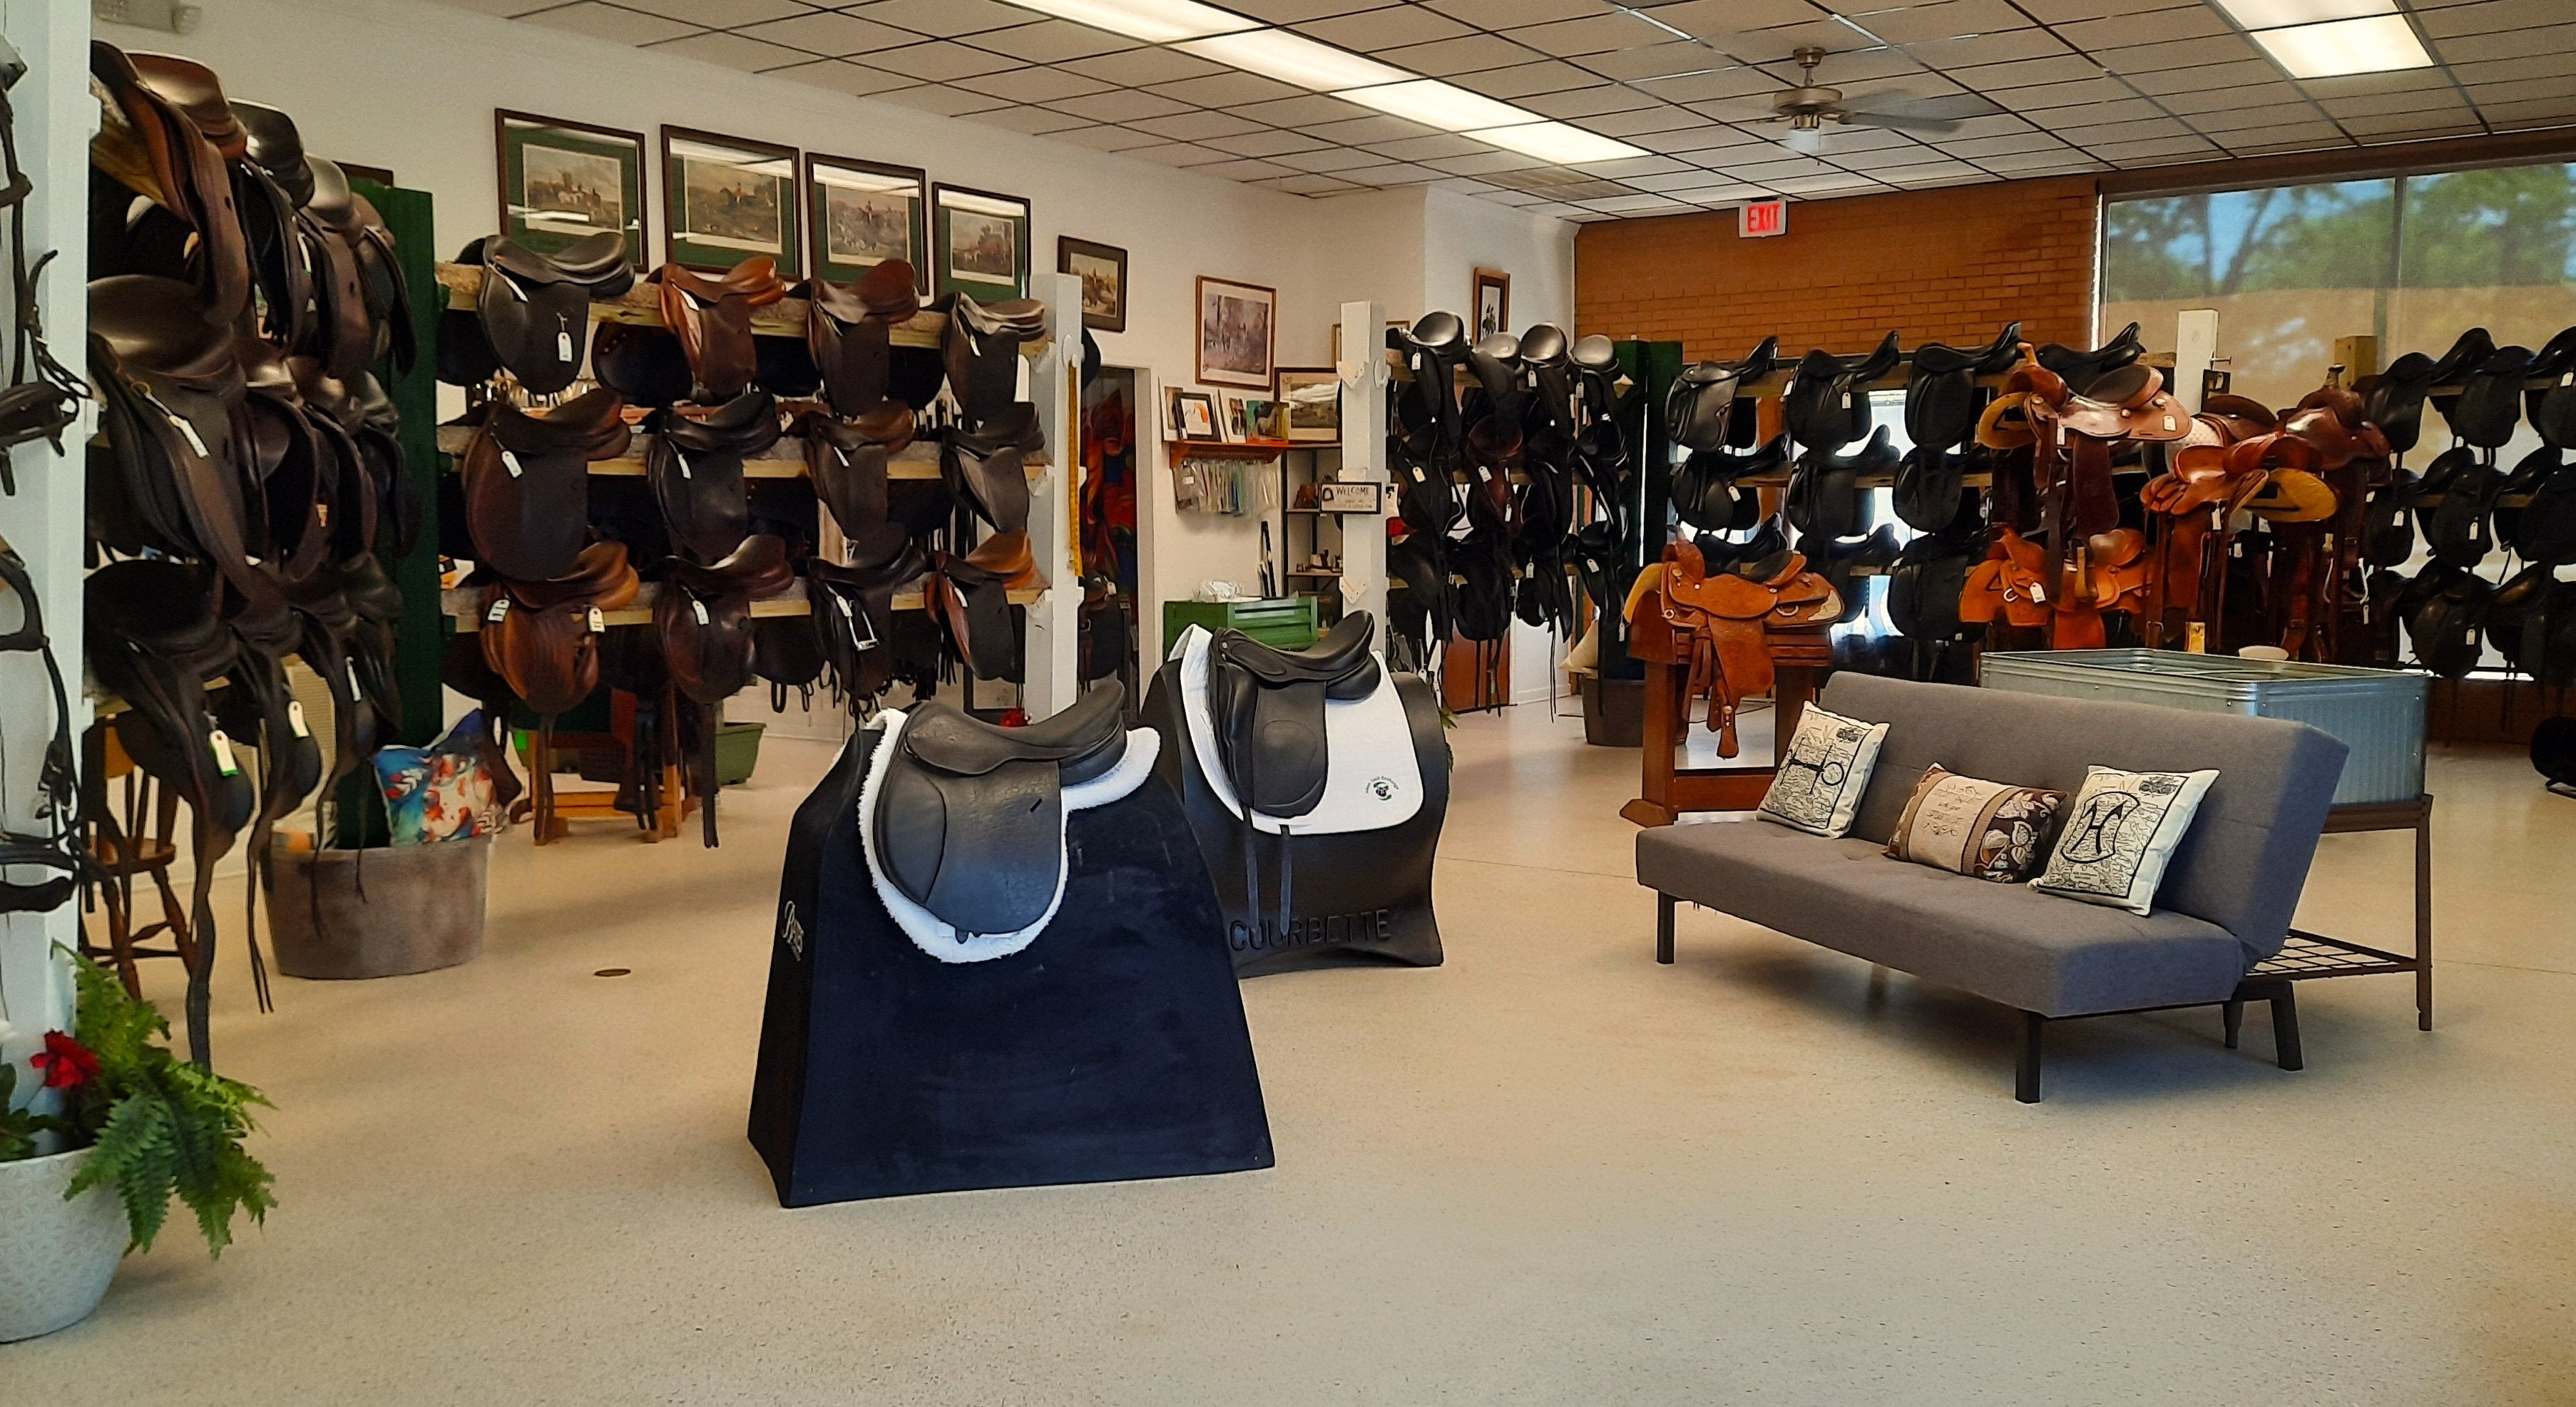 Aiken Tack Exchange: THE Consignment Store For Horse People